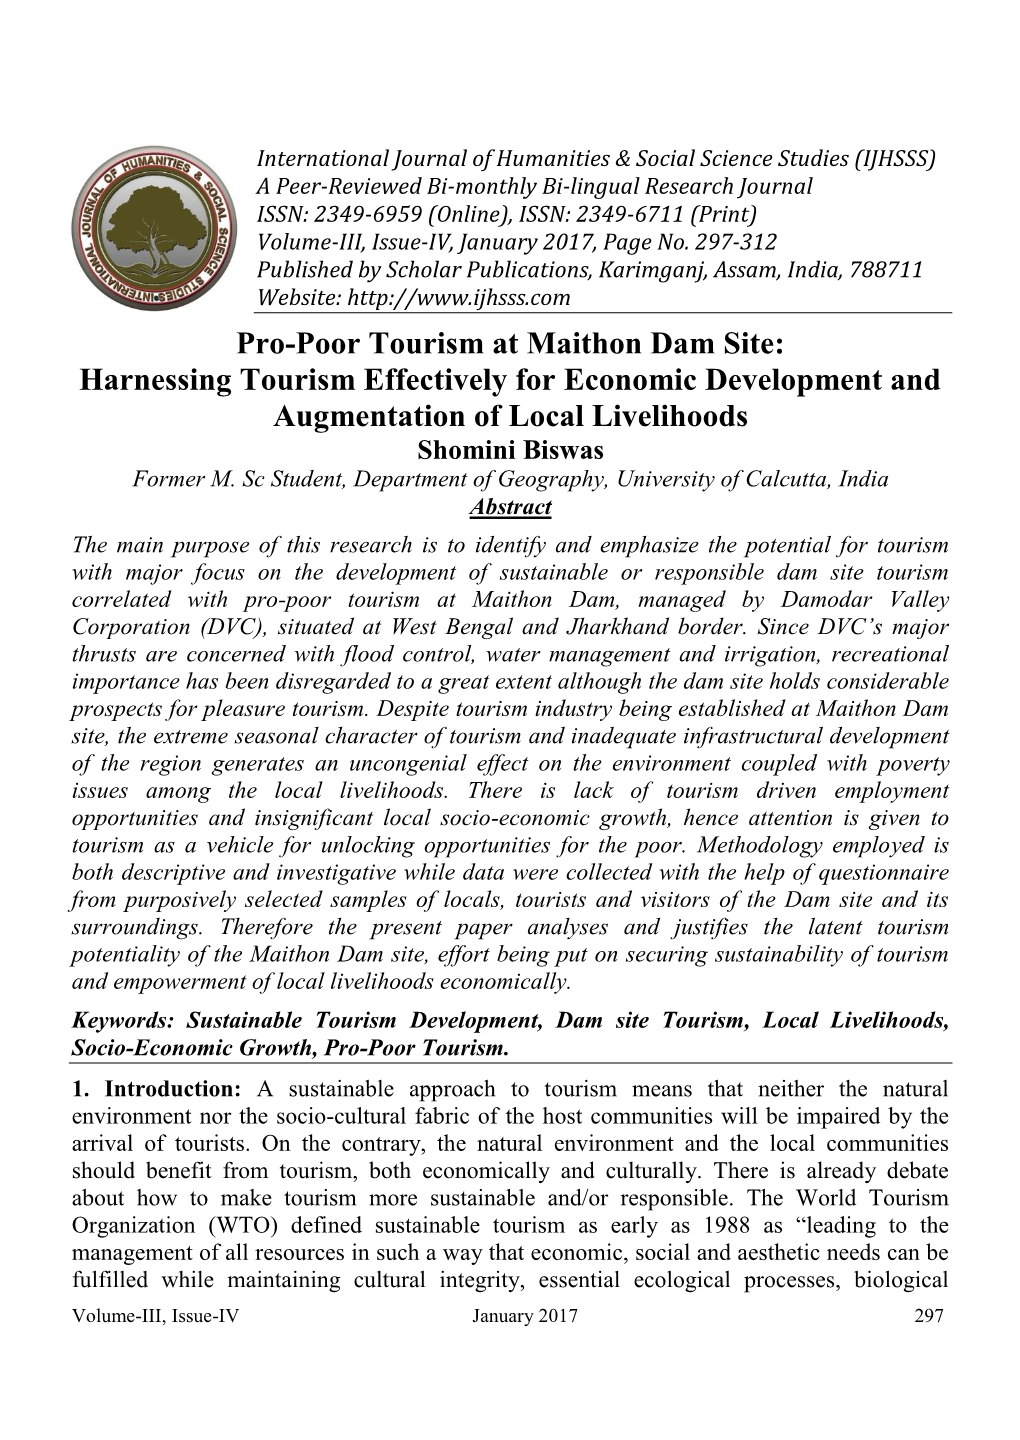 Pro-Poor Tourism at Maithon Dam Site: Harnessing Tourism Effectively for Economic Development and Augmentation of Local Livelihoods Shomini Biswas Former M